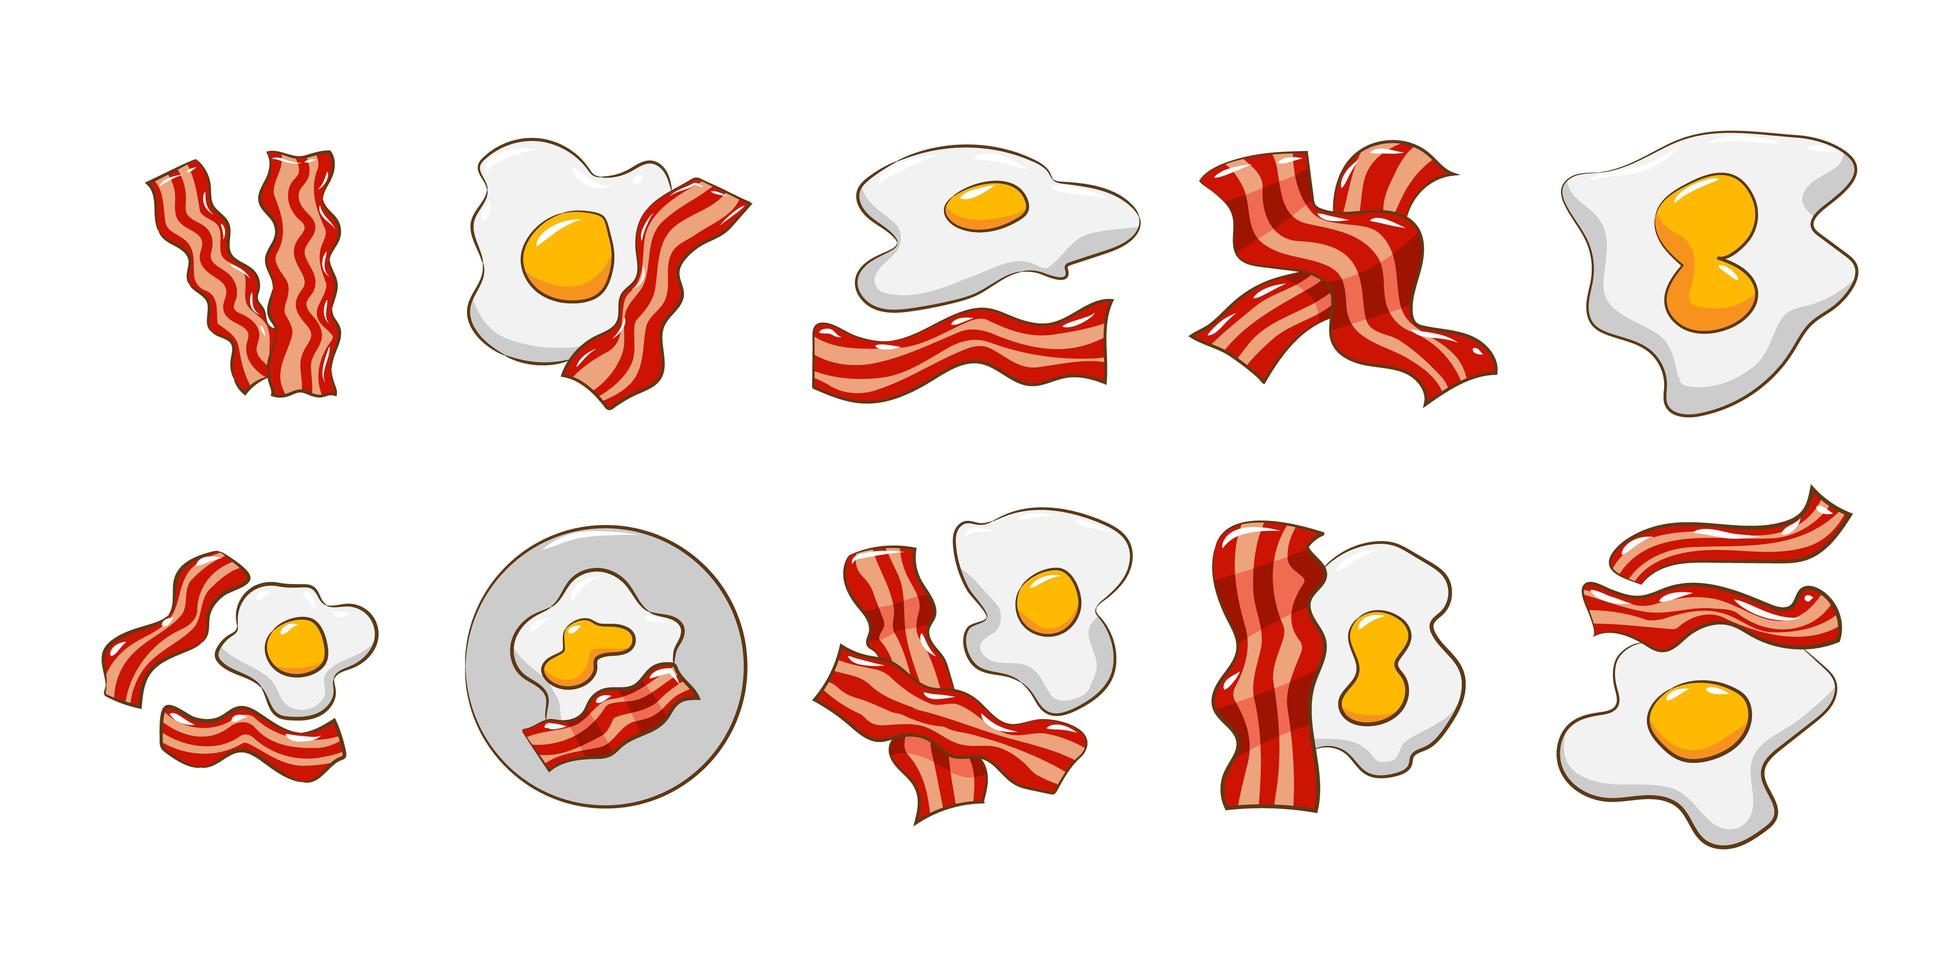 Bacon and egg element set vector